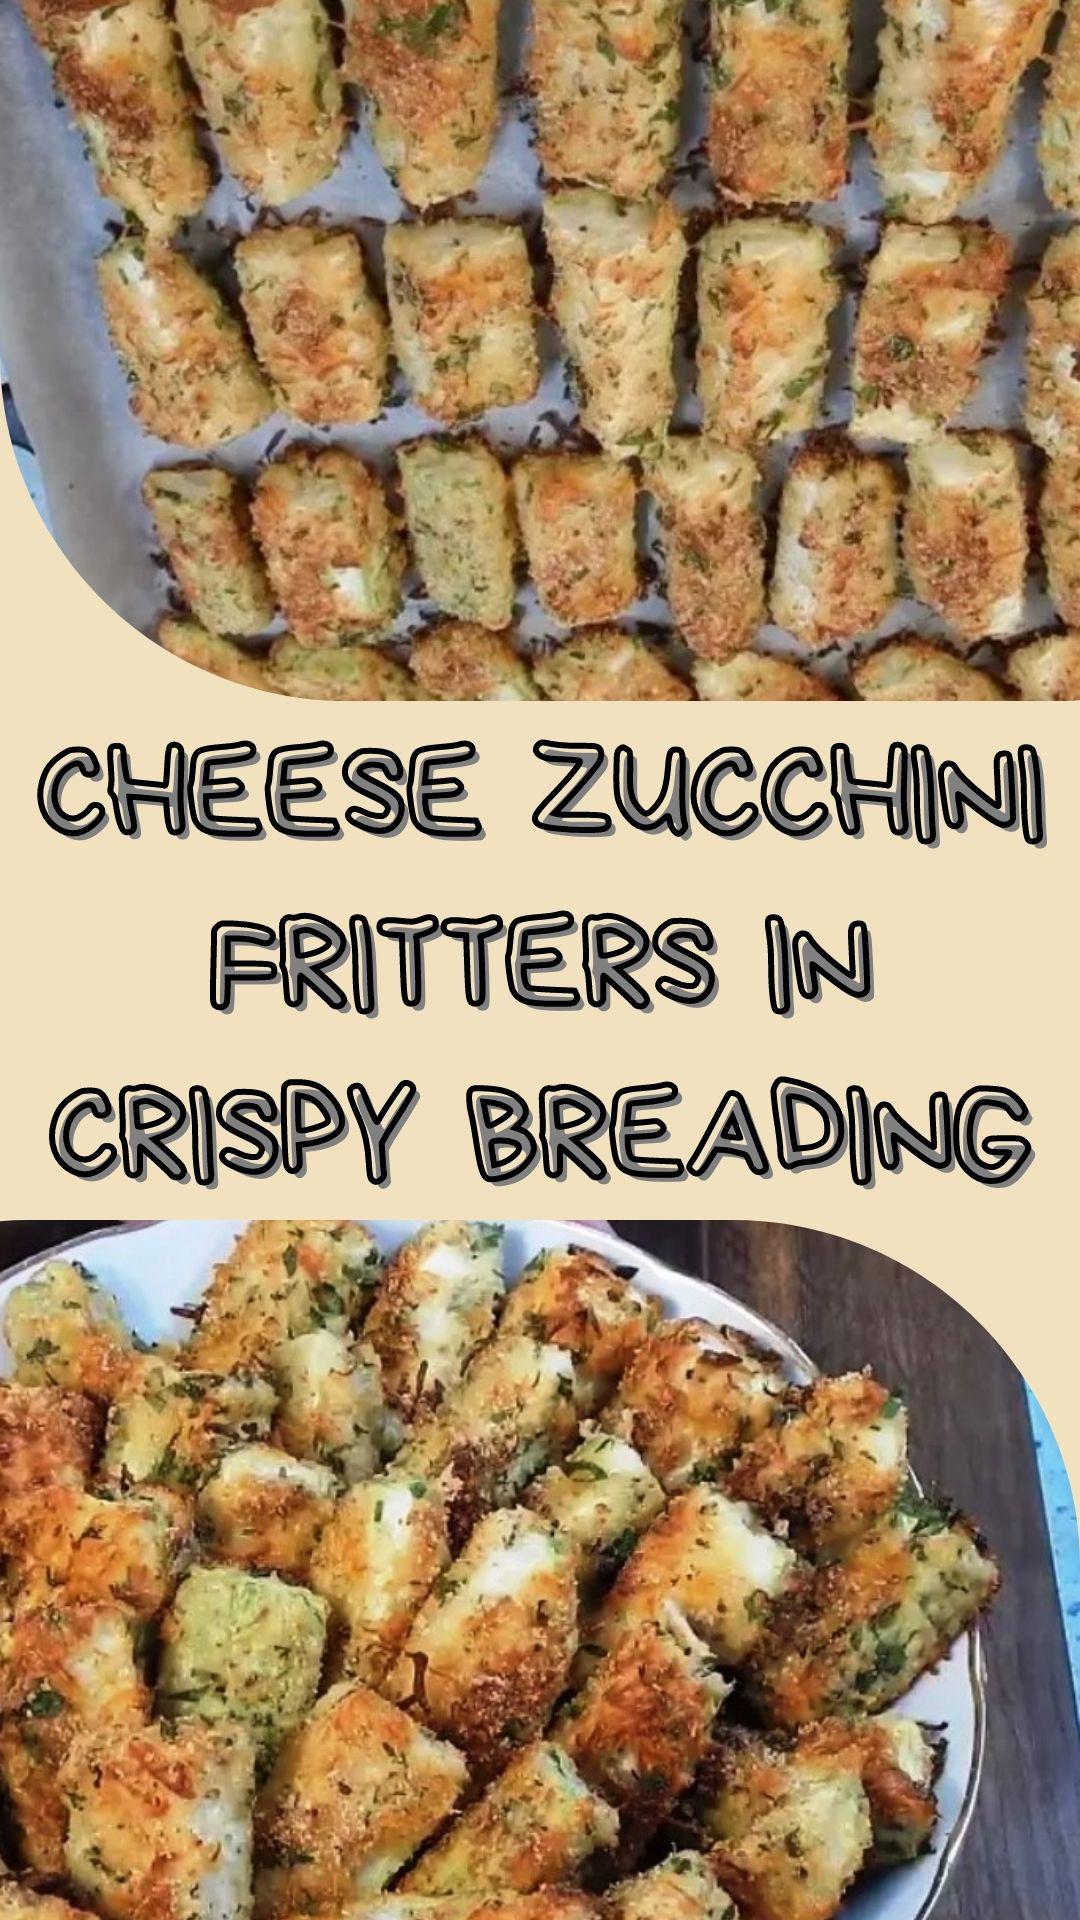 Cheese Zucchini Fritters in crispy breading